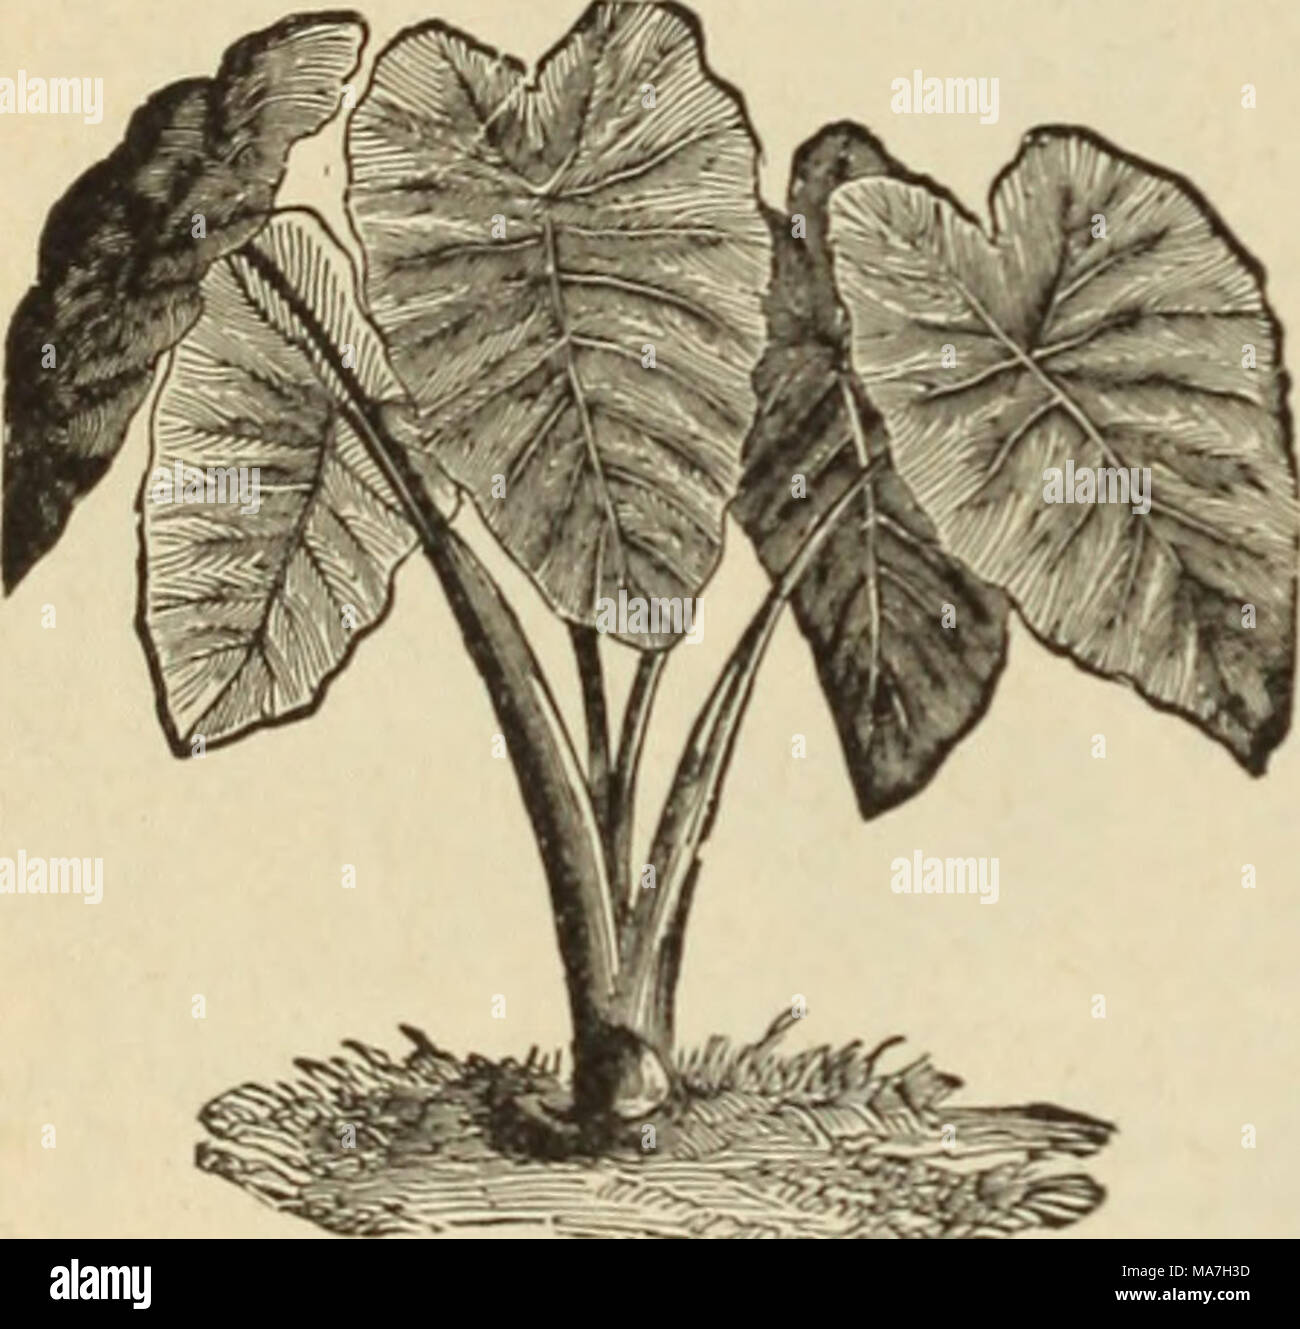 . E.H. Hunt's catalogue : florists' seeds, supplies, bulbs . CALADIUMS. We have secured an extra tine lot .if these bulbs and can make very lOW rates on large quantities. doz. ioo iooo Esculentum, lt.&gt;2 40 2 50 20 00 &quot; ' 2 &quot; 3 75 4 SO 40 00 &quot;' 3 &quot; 4 1 25 8 50 80 00 4bote prices arc I OH . Order at once. IRIS. Special low prices. rxiz. IOO German White 75 -; 00 &quot; Purple 75 4 BO Yellow 75 4 oo &quot; Blue „ 75 4 00 Mixed „ 50 3 SO Keempferi, mixed 1 50 10 00 '• named. 2 00 15 00 LILIES. Auratum, 7 t» 9 in . 75 5 50 &quot; 9 ,; 11 &quot;   1 00 7 50 Rubrnrn, 9 •• 11 •• Stock Photo